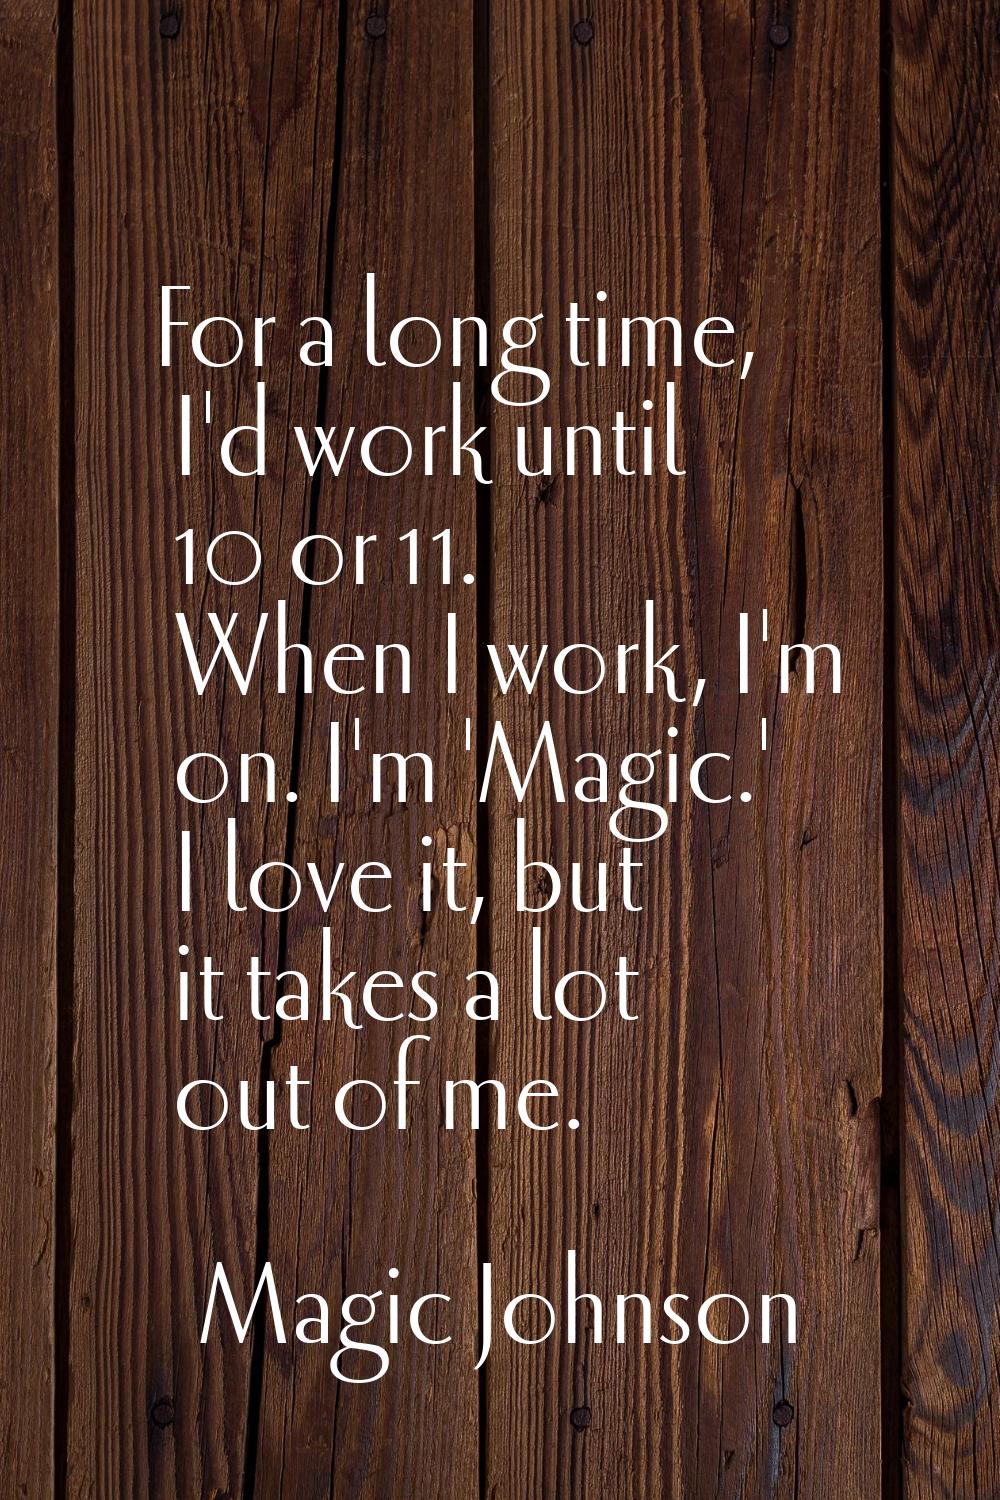 For a long time, I'd work until 10 or 11. When I work, I'm on. I'm 'Magic.' I love it, but it takes